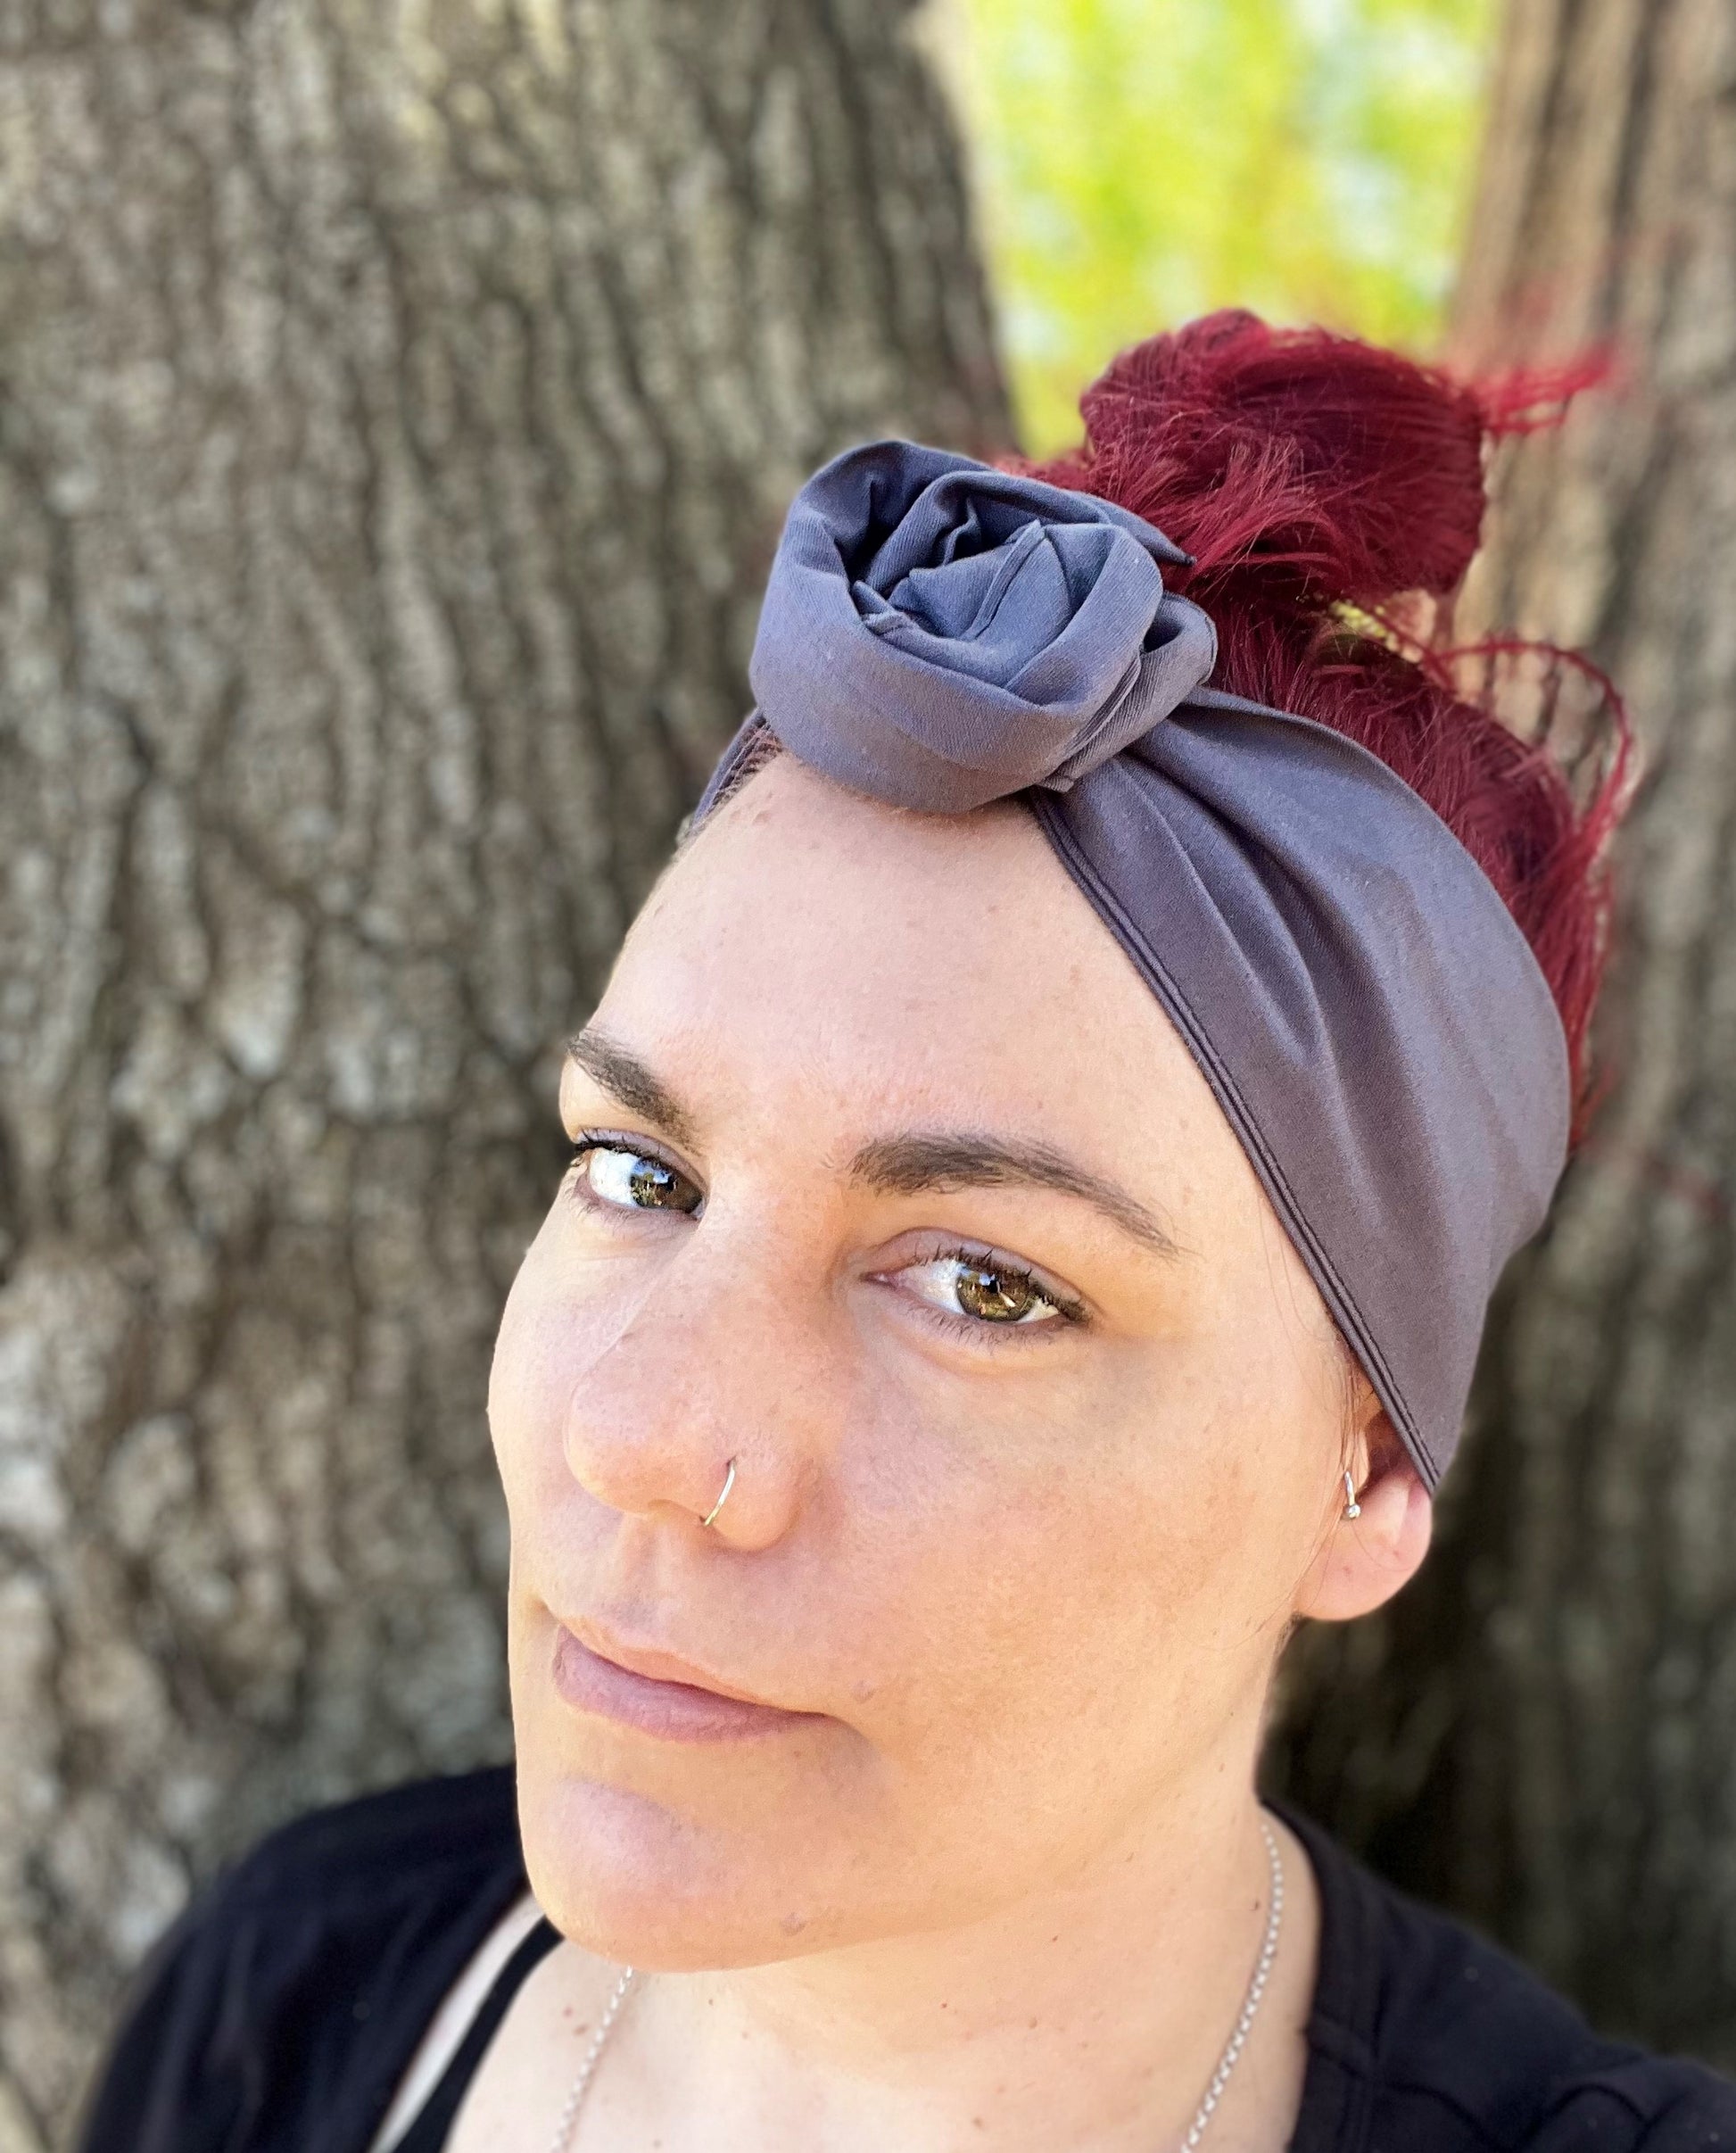 Dark Grey Wire Headband - Bae Bands Australia Twist Bow Wire Headband allows for your headband to stay in place all day with no headaches,